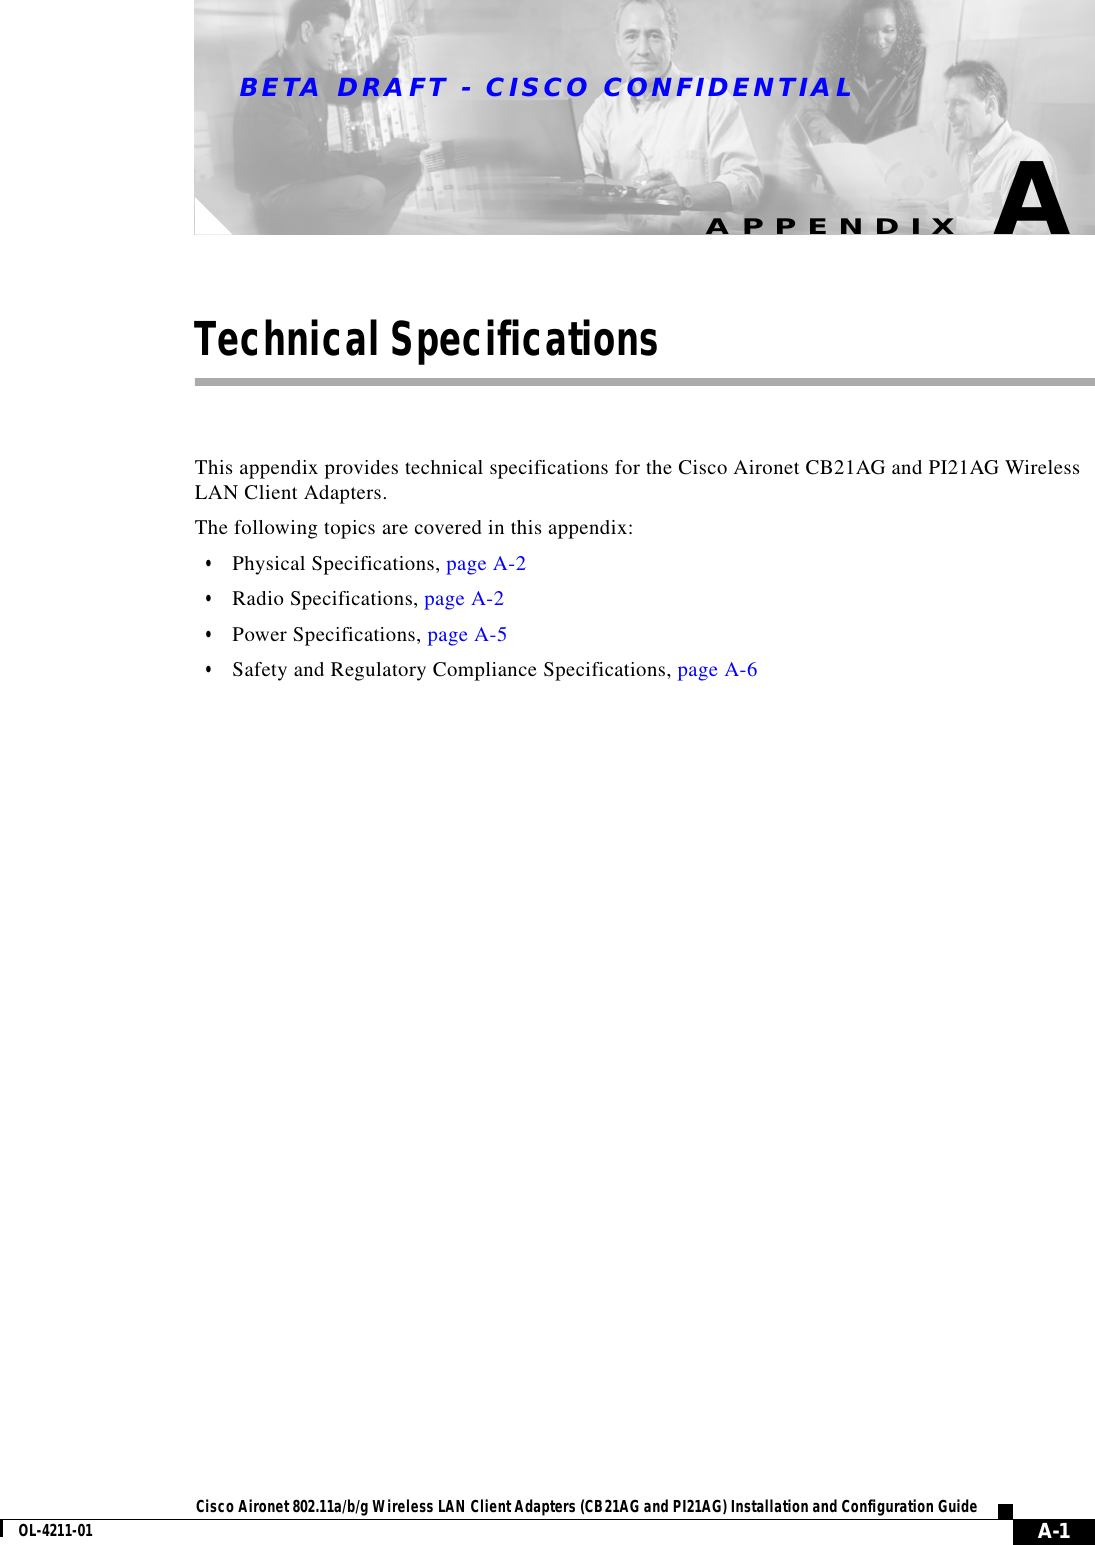 BETA DRAFT - CISCO CONFIDENTIAL A-1Cisco Aironet 802.11a/b/g Wireless LAN Client Adapters (CB21AG and PI21AG) Installation and Configuration GuideOL-4211-01APPENDIXATechnical SpecificationsThis appendix provides technical specifications for the Cisco Aironet CB21AG and PI21AG Wireless LAN Client Adapters.The following topics are covered in this appendix:•Physical Specifications, page A-2•Radio Specifications, page A-2•Power Specifications, page A-5•Safety and Regulatory Compliance Specifications, page A-6